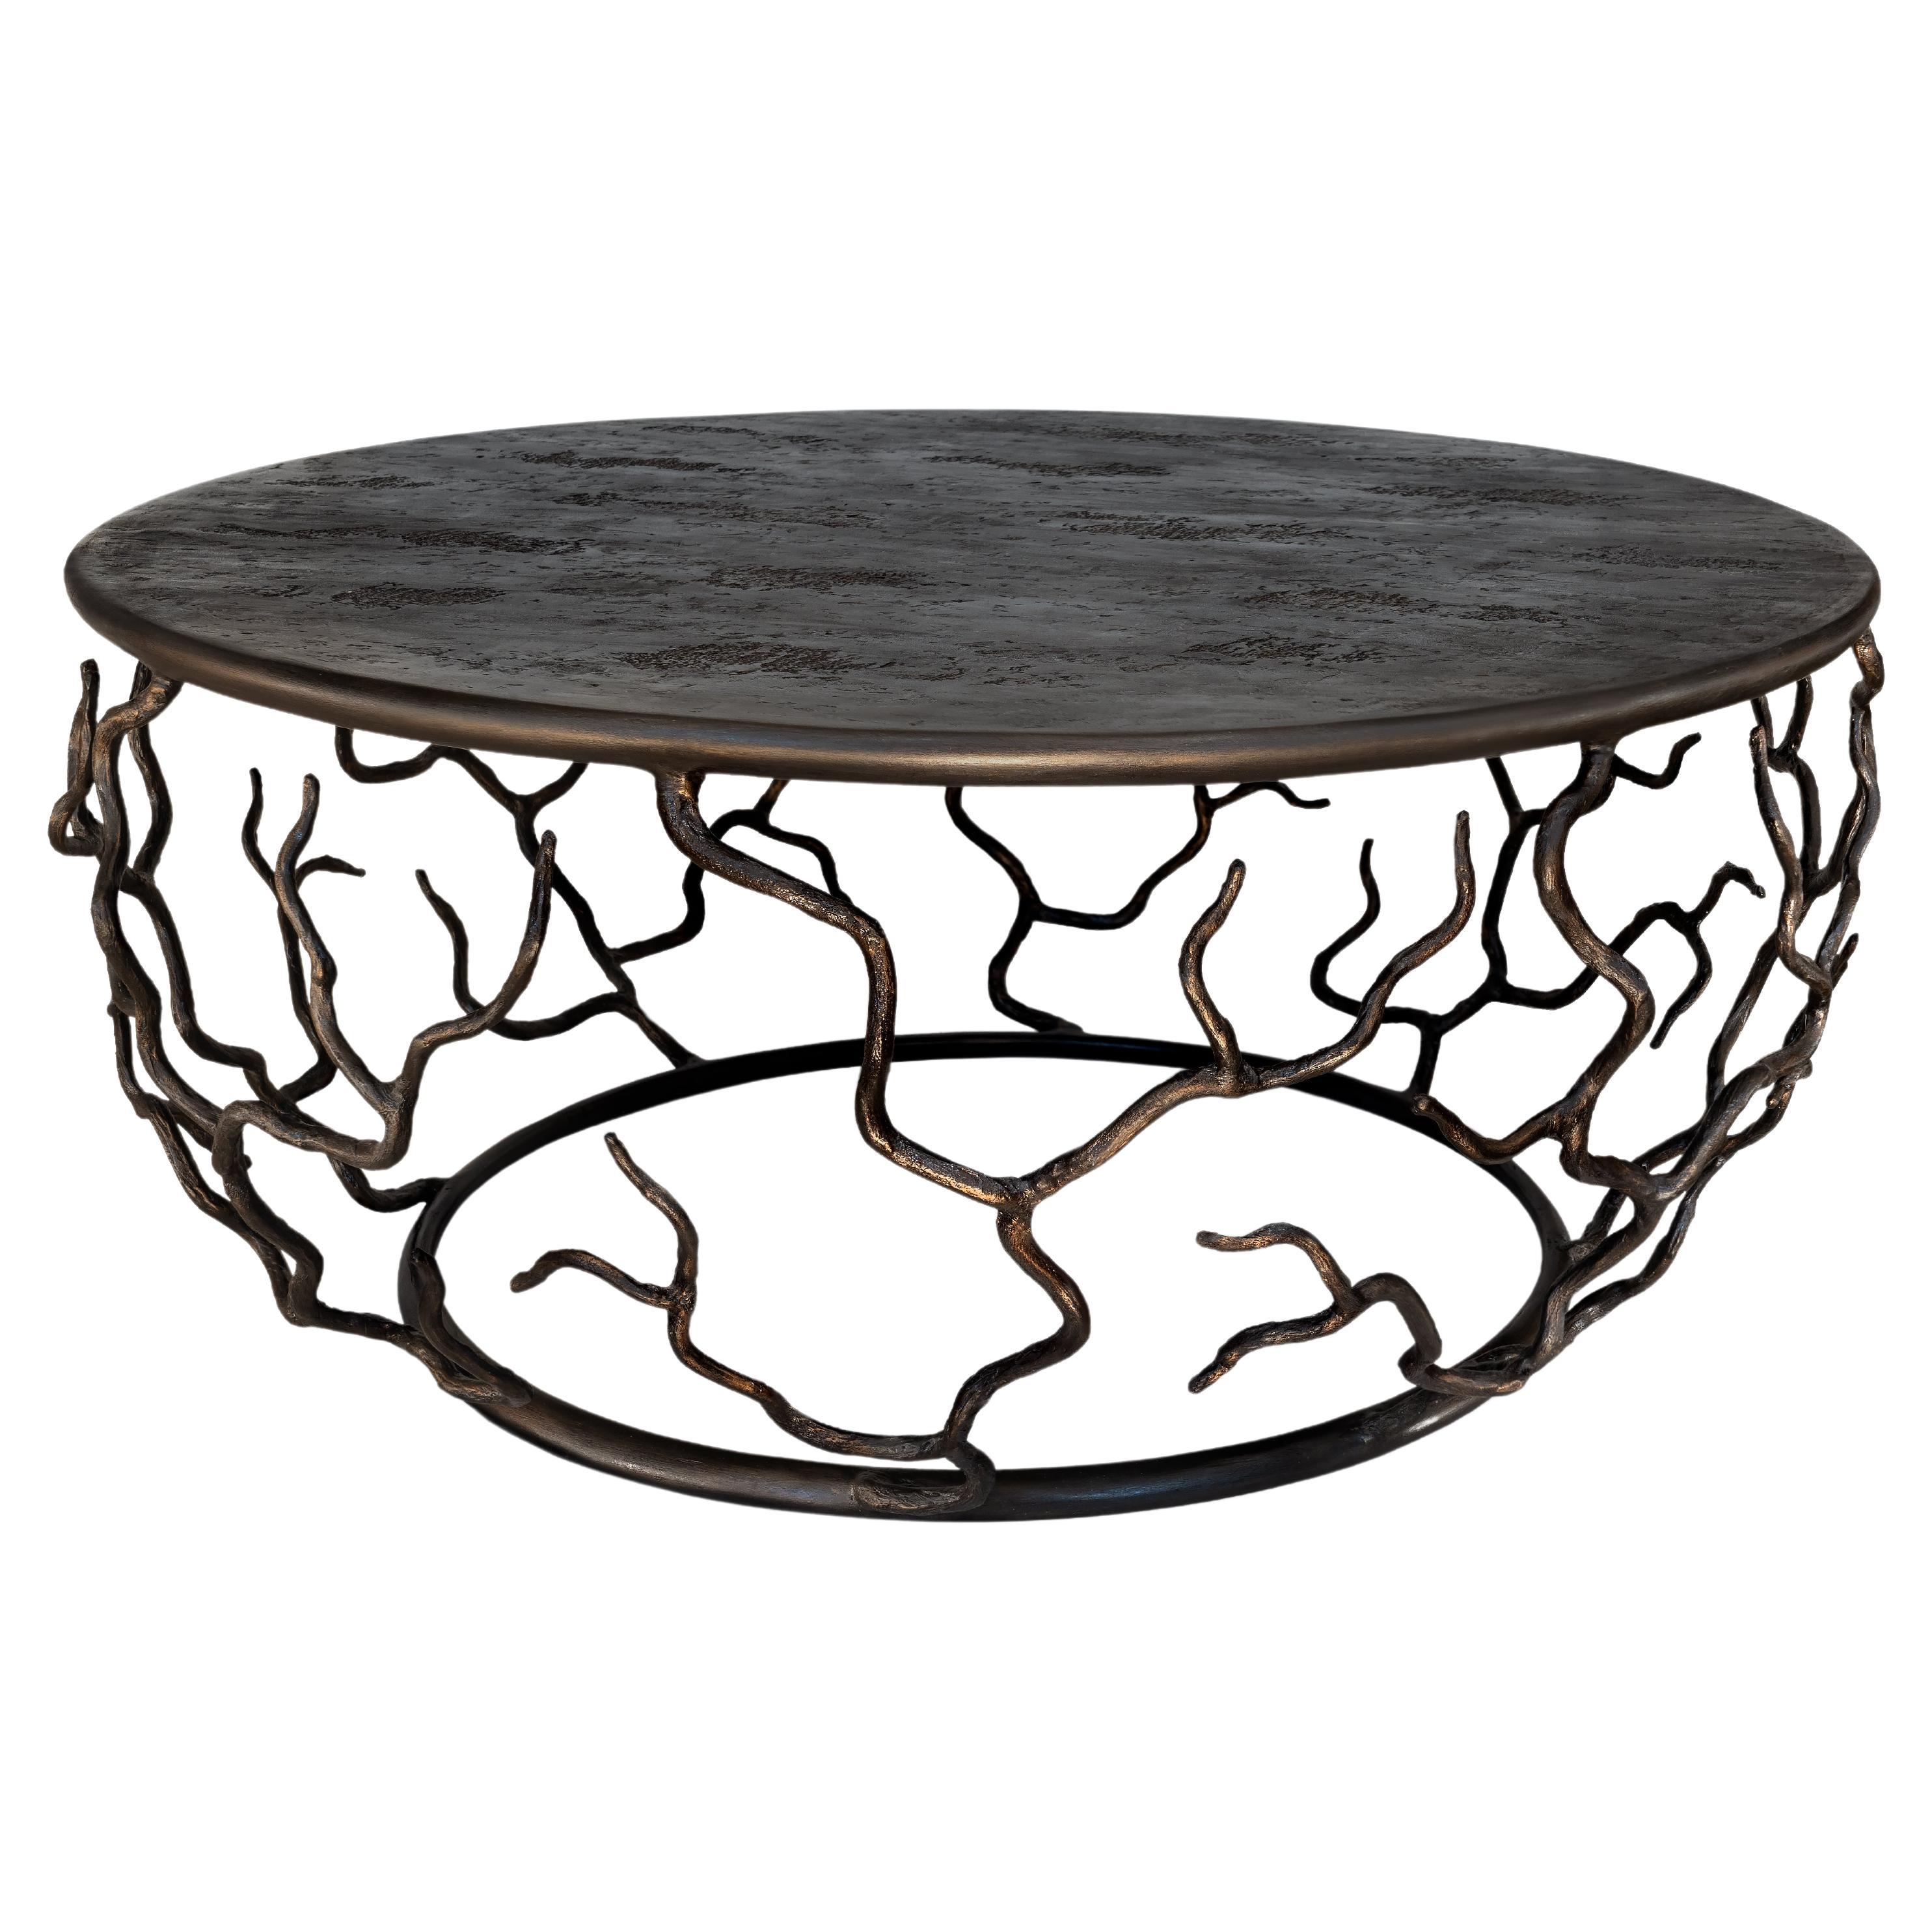 Organic Coffee Table “Etna” in Forest Brown Finish, Benediko For Sale